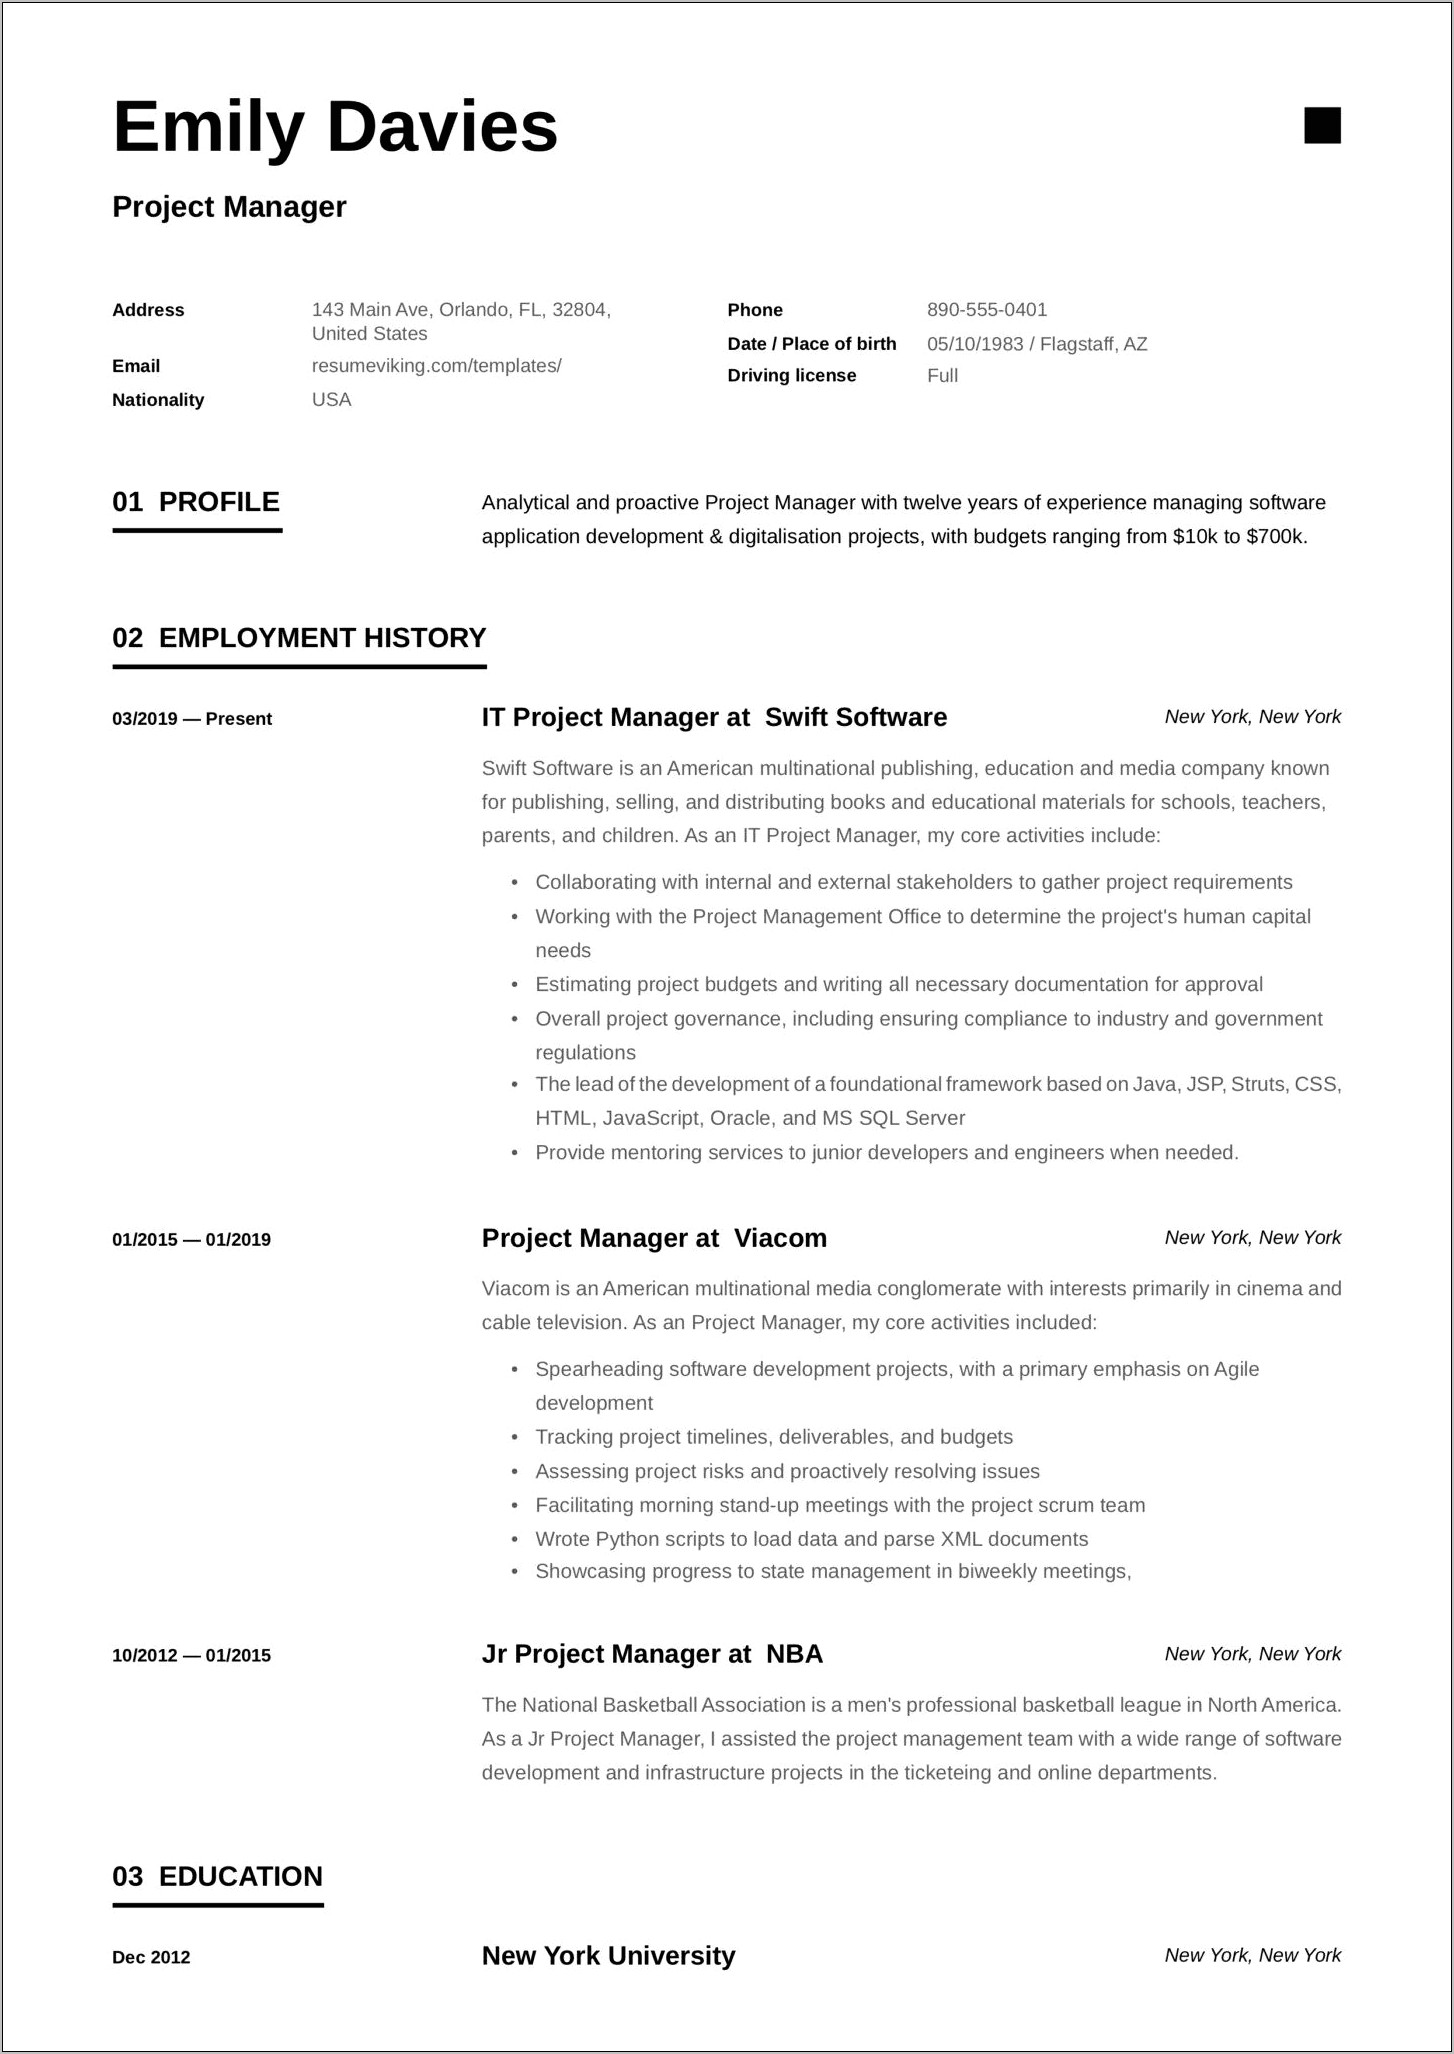 Resume Examples For Program Manager Downloadable